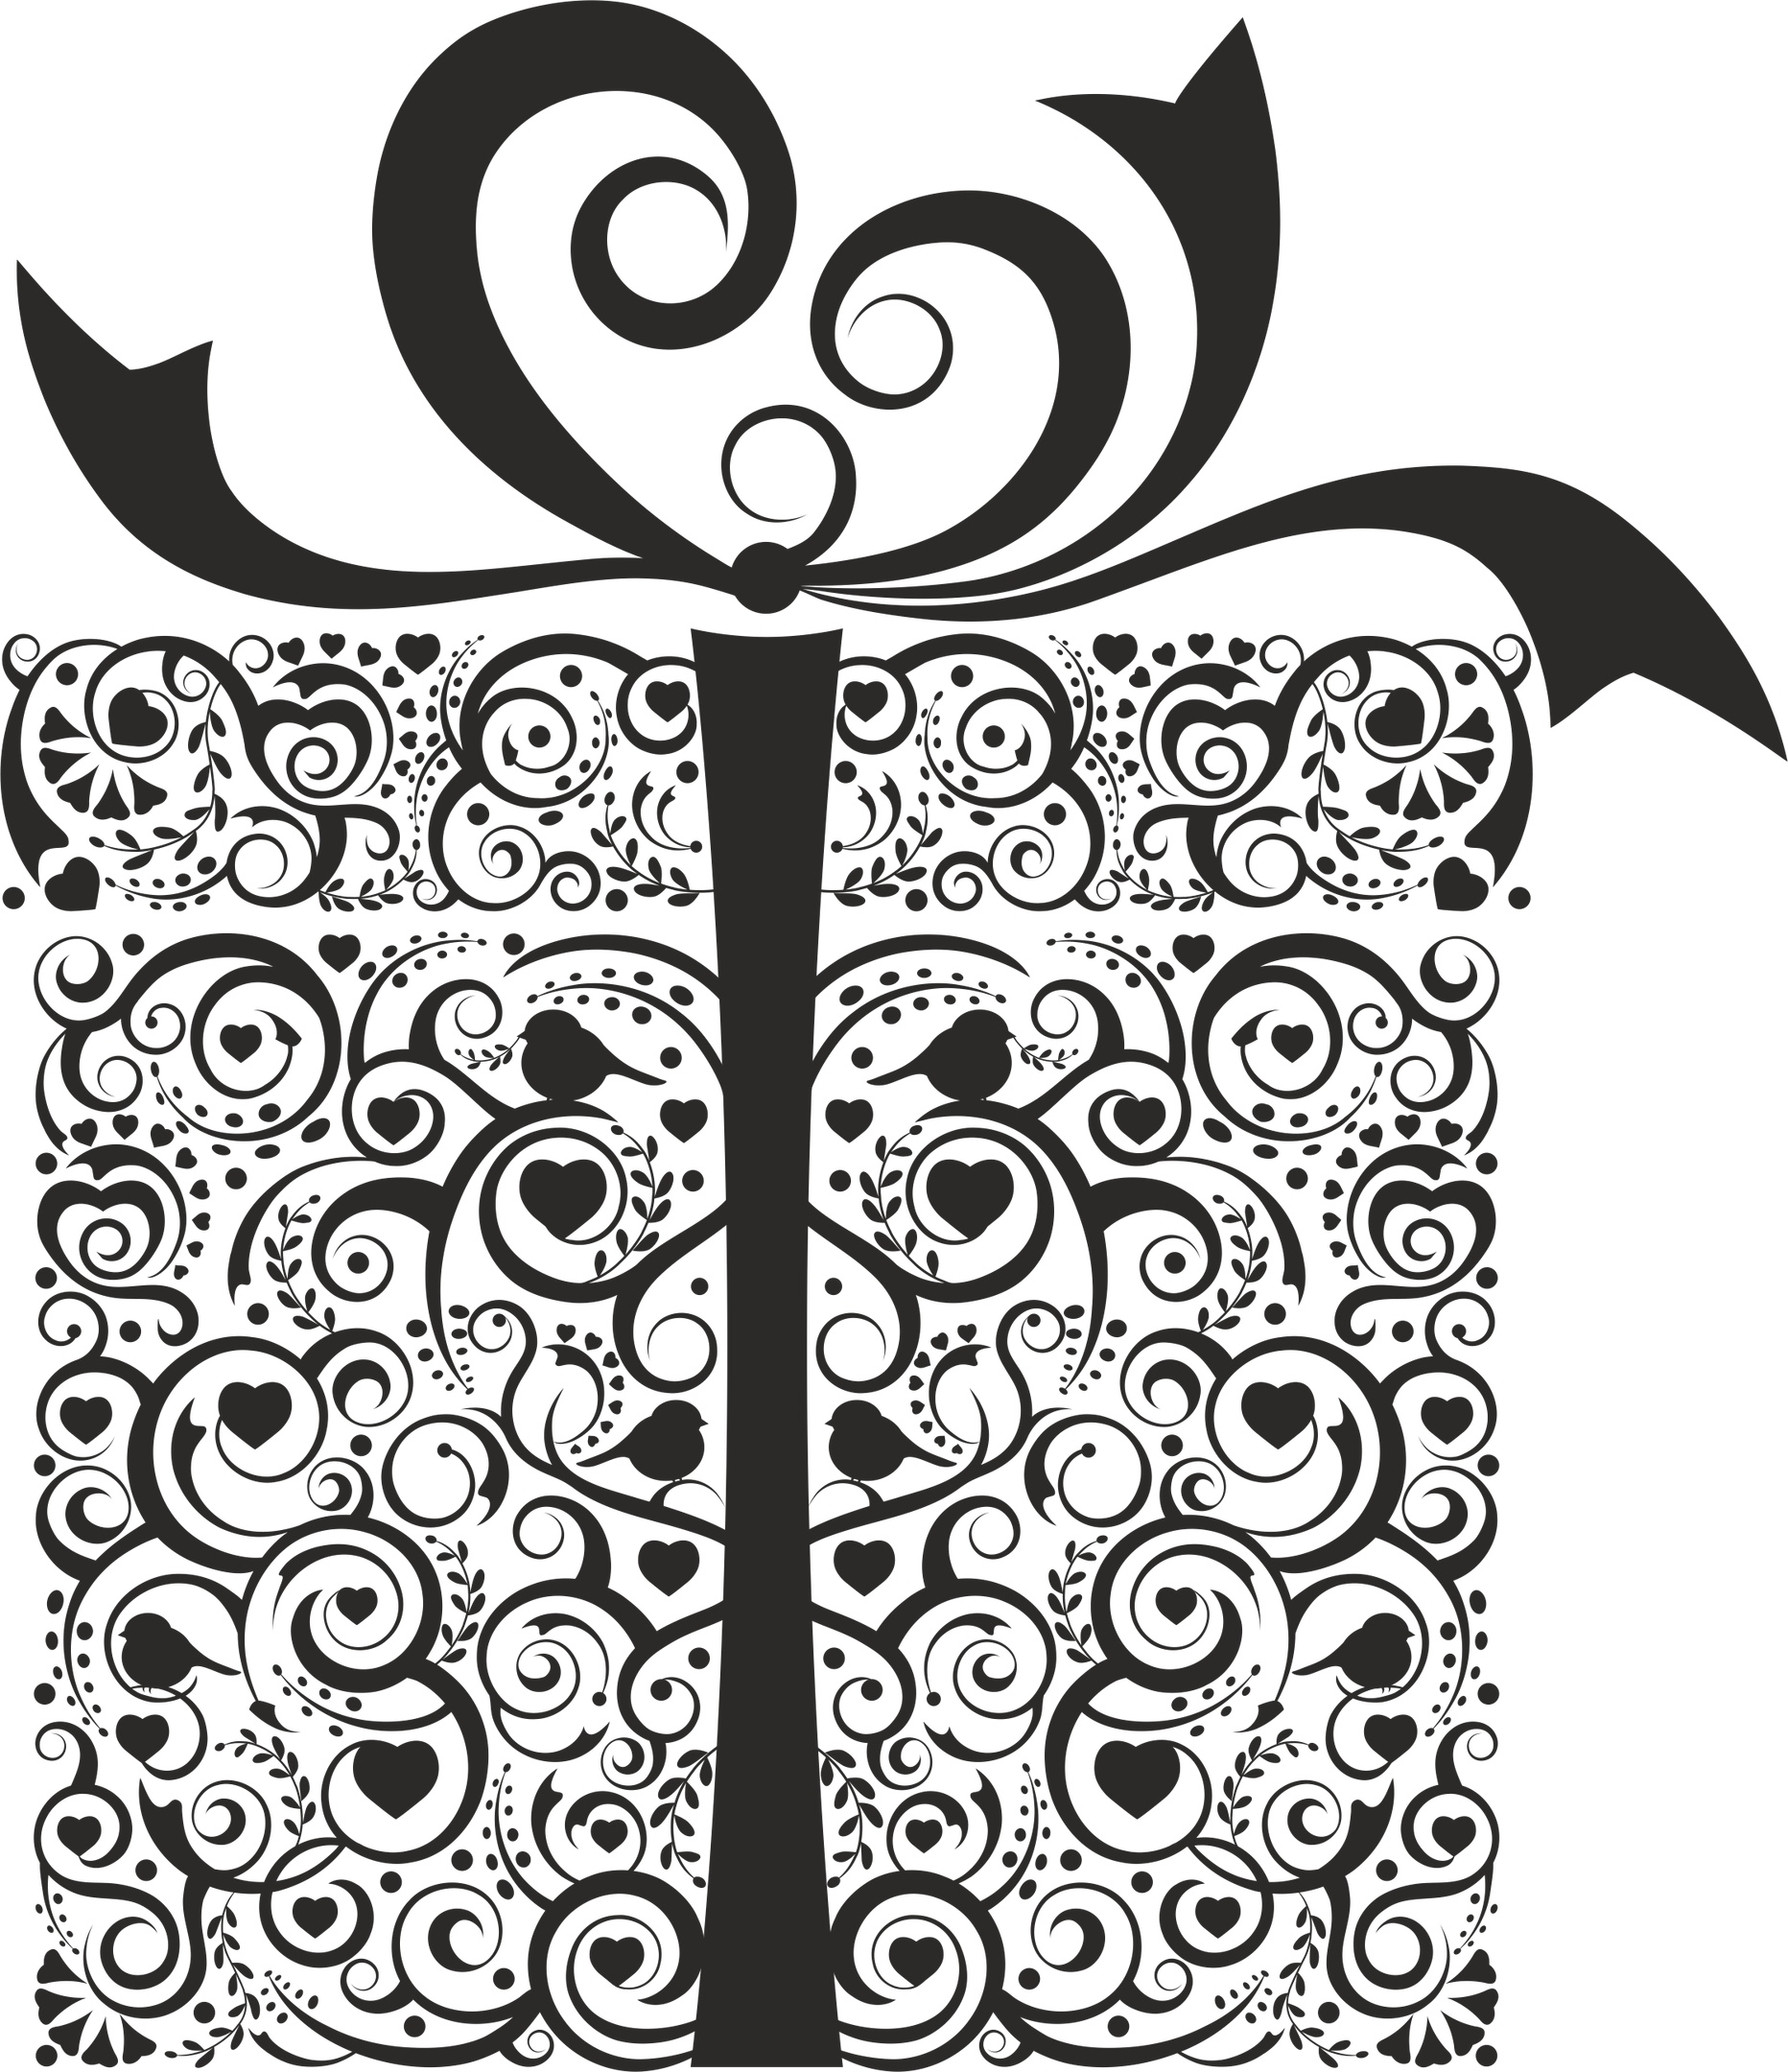 Ornament Gift Box Free Vector cdr Download - 3axis.co